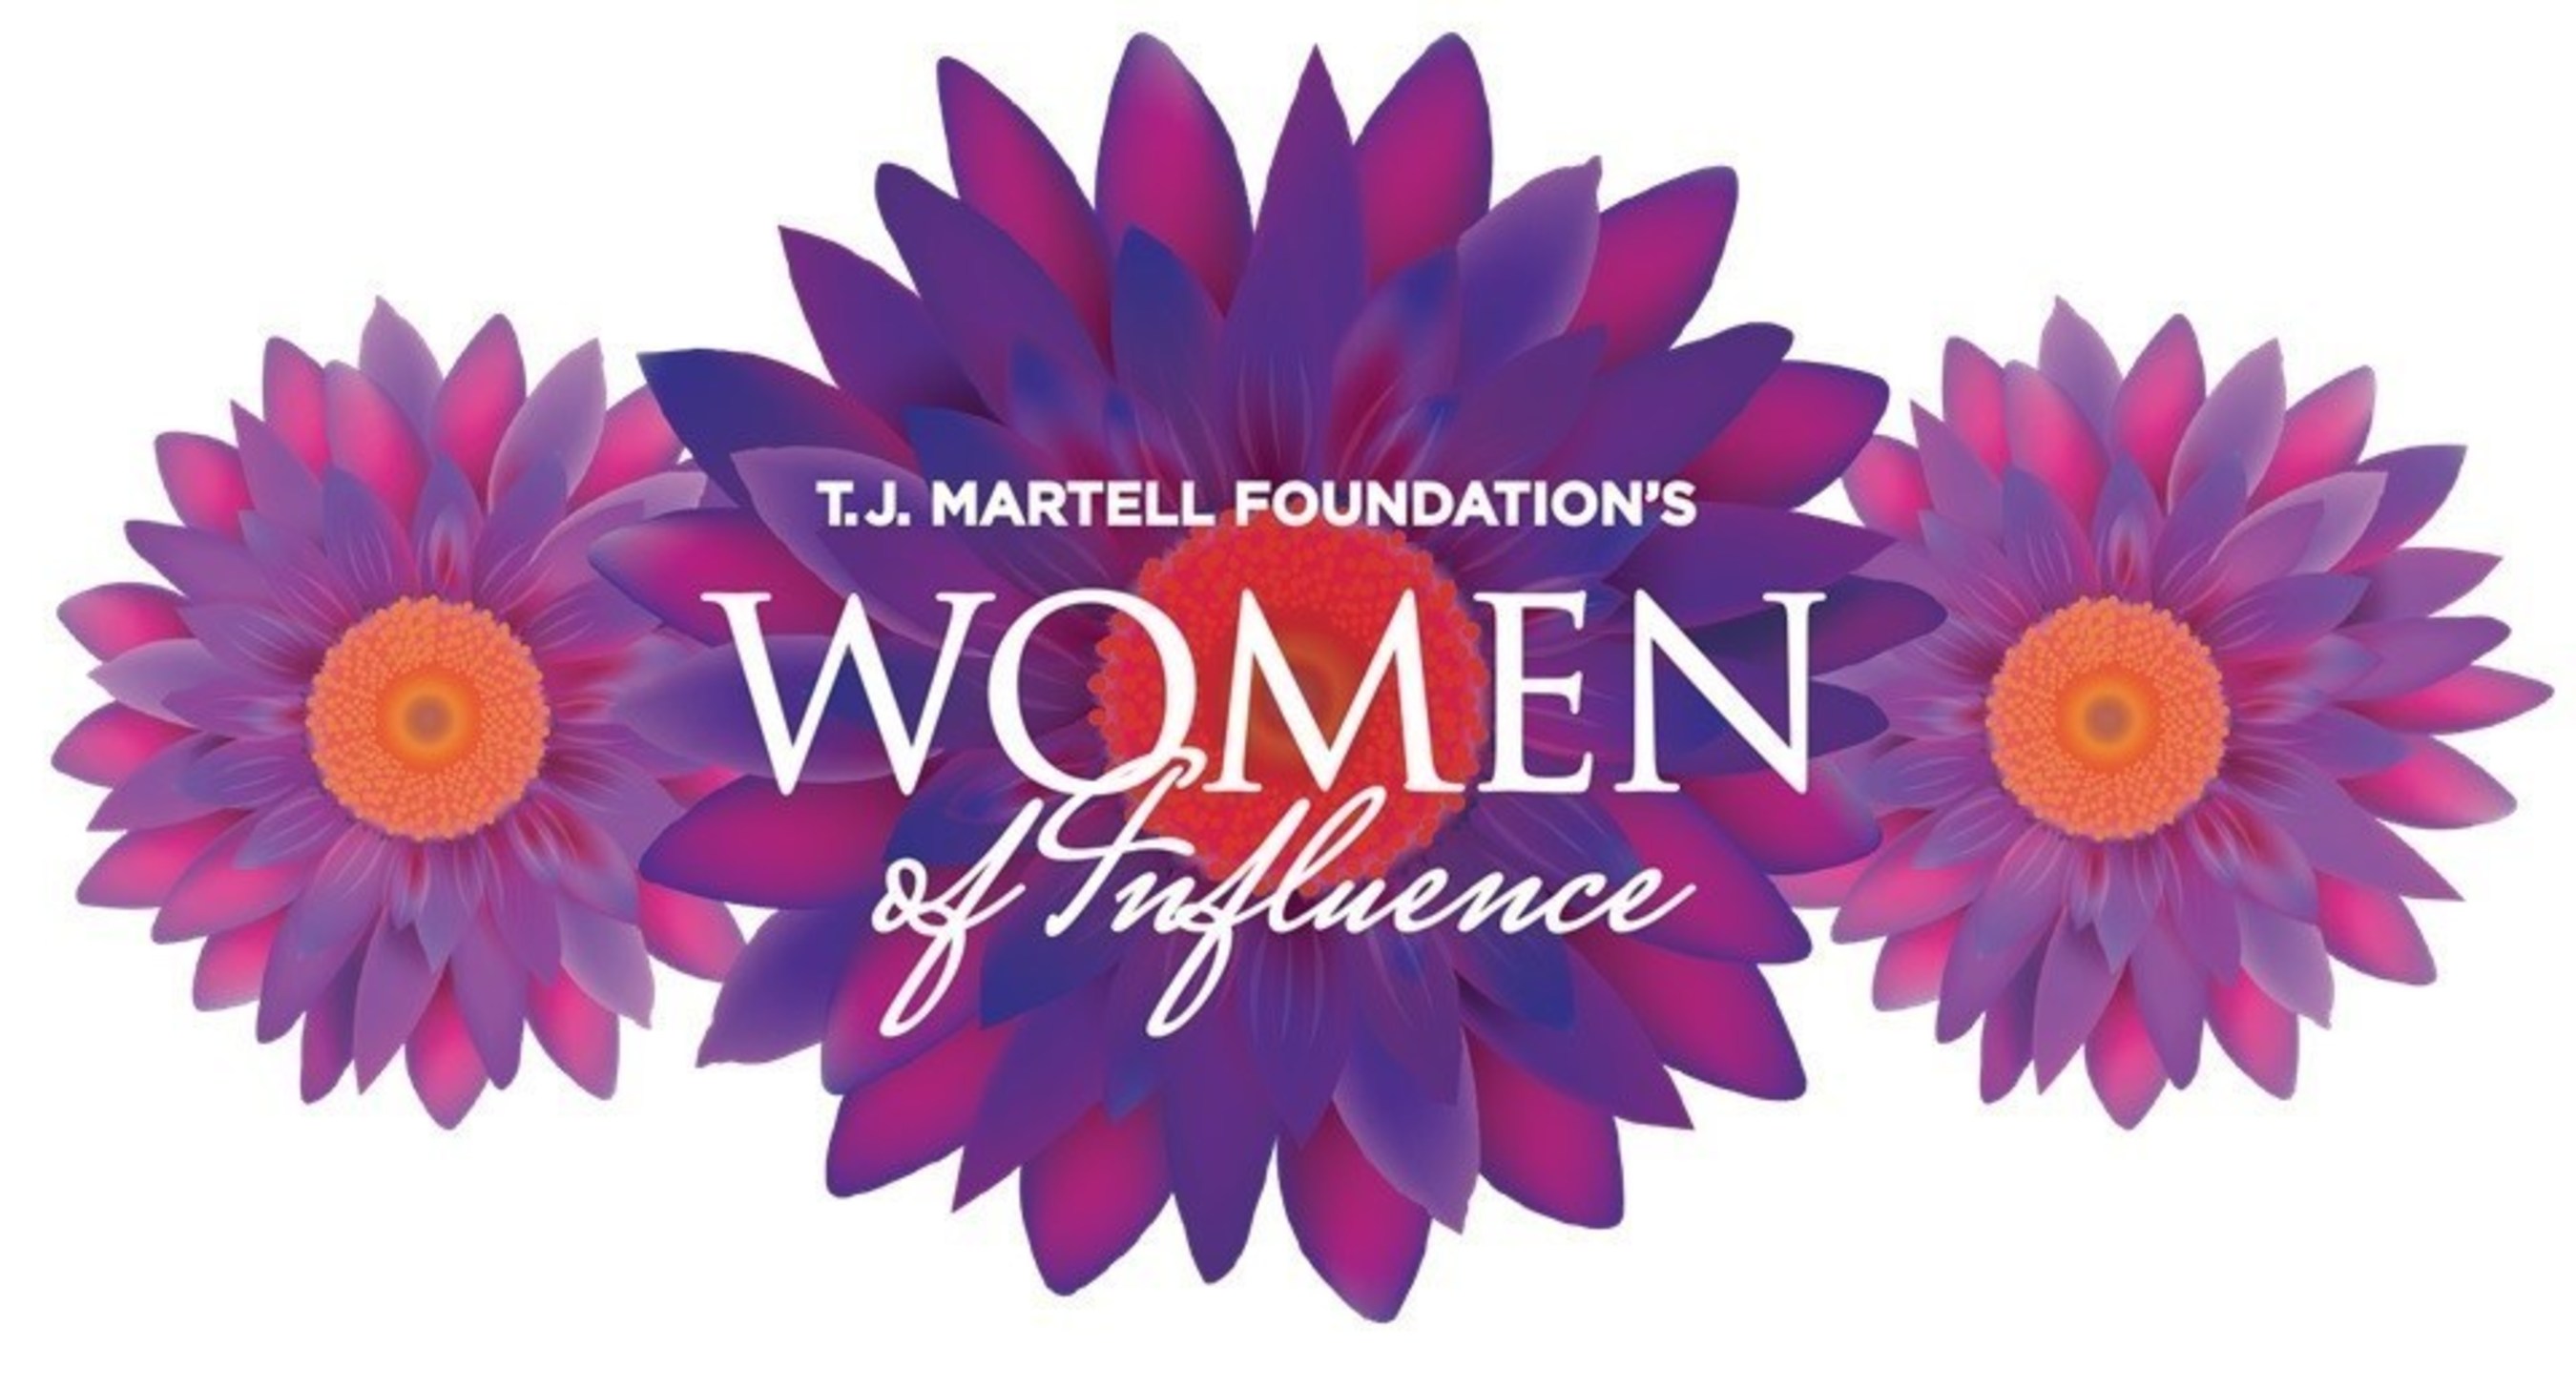 T.J. Martell Foundation to Honor Dynamic Leaders at 2015 Women of Influence Awards and Brunch. Los Angeles celebration will honor Jennifer Justice, EVP of Strategic Marketing & Business Development, Roc Nation;Ty Stiklorius, Co-President, Atom Factory; Sherry Dewane, Wealth Advisor for Wells Fargo; and Sandra Fluke, California State Director, Voices of Progress.